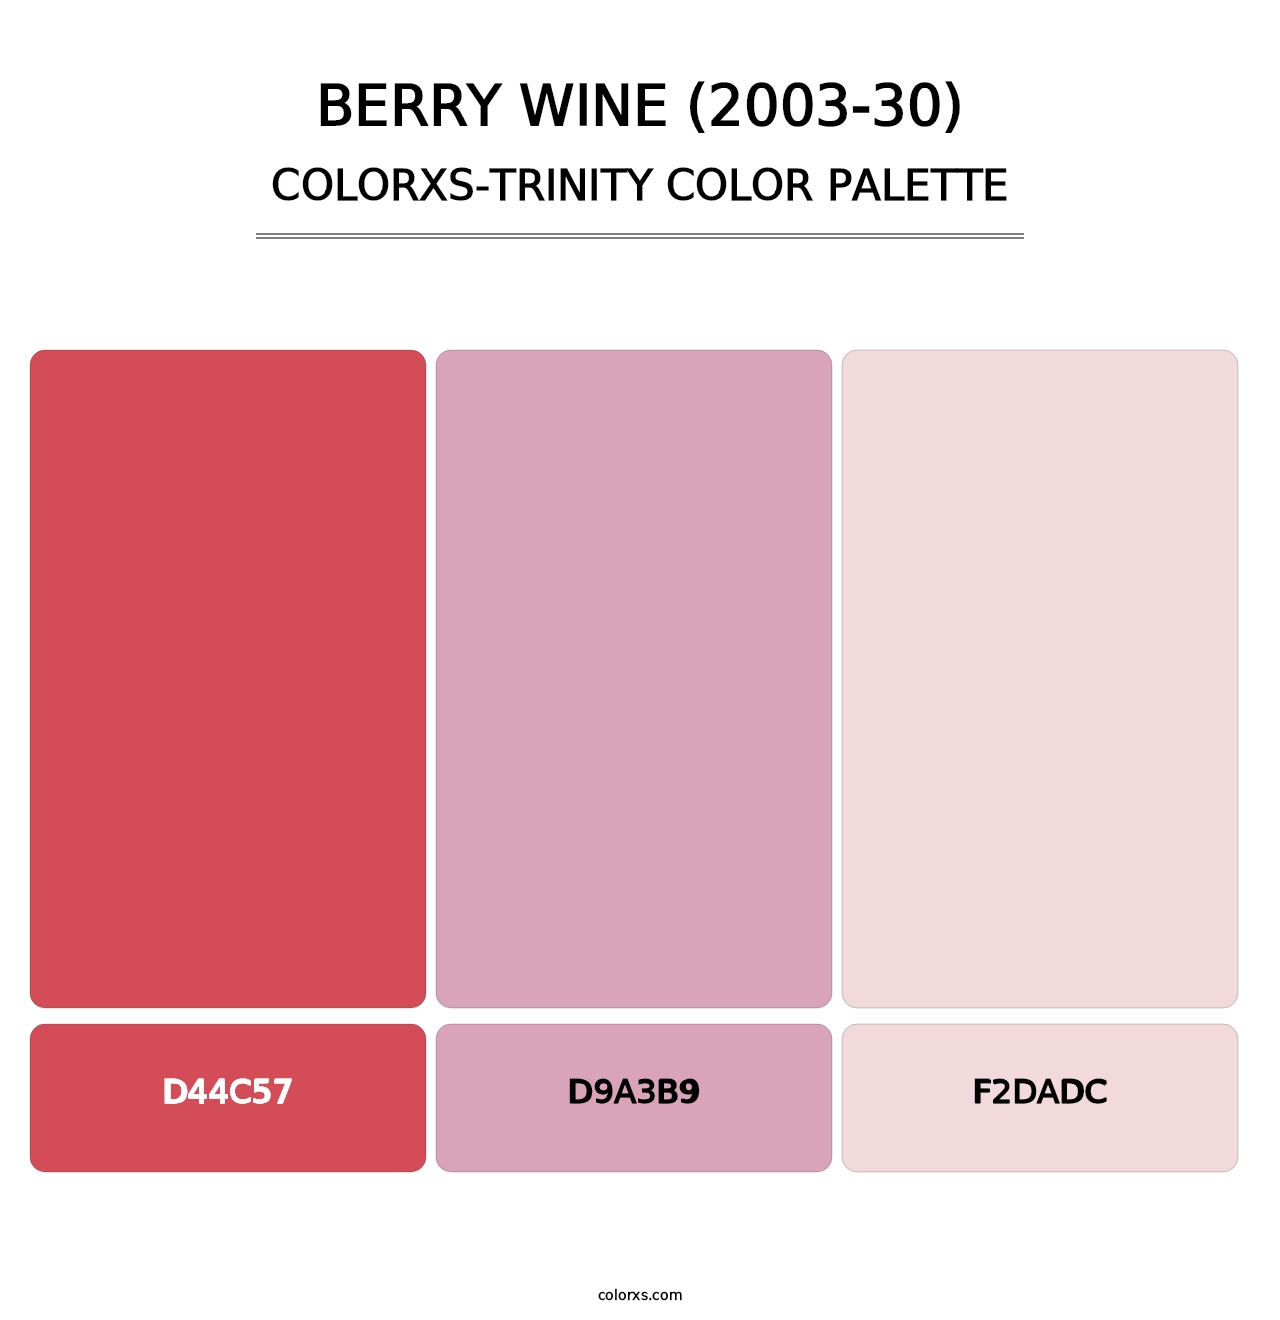 Berry Wine (2003-30) - Colorxs Trinity Palette